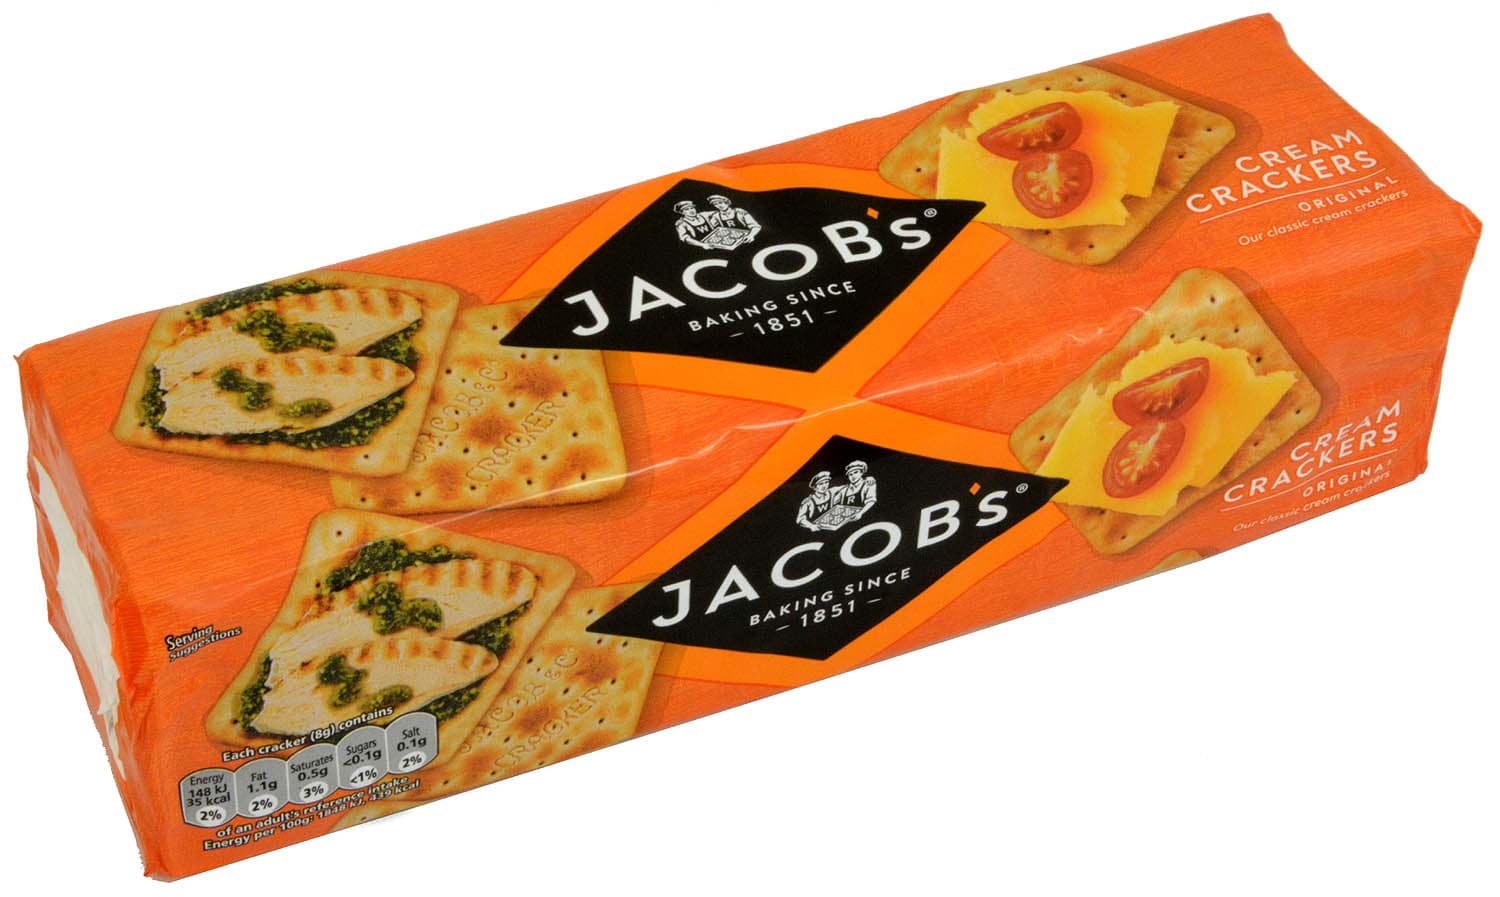 Picture of Jacobs Cream Crackers 300g